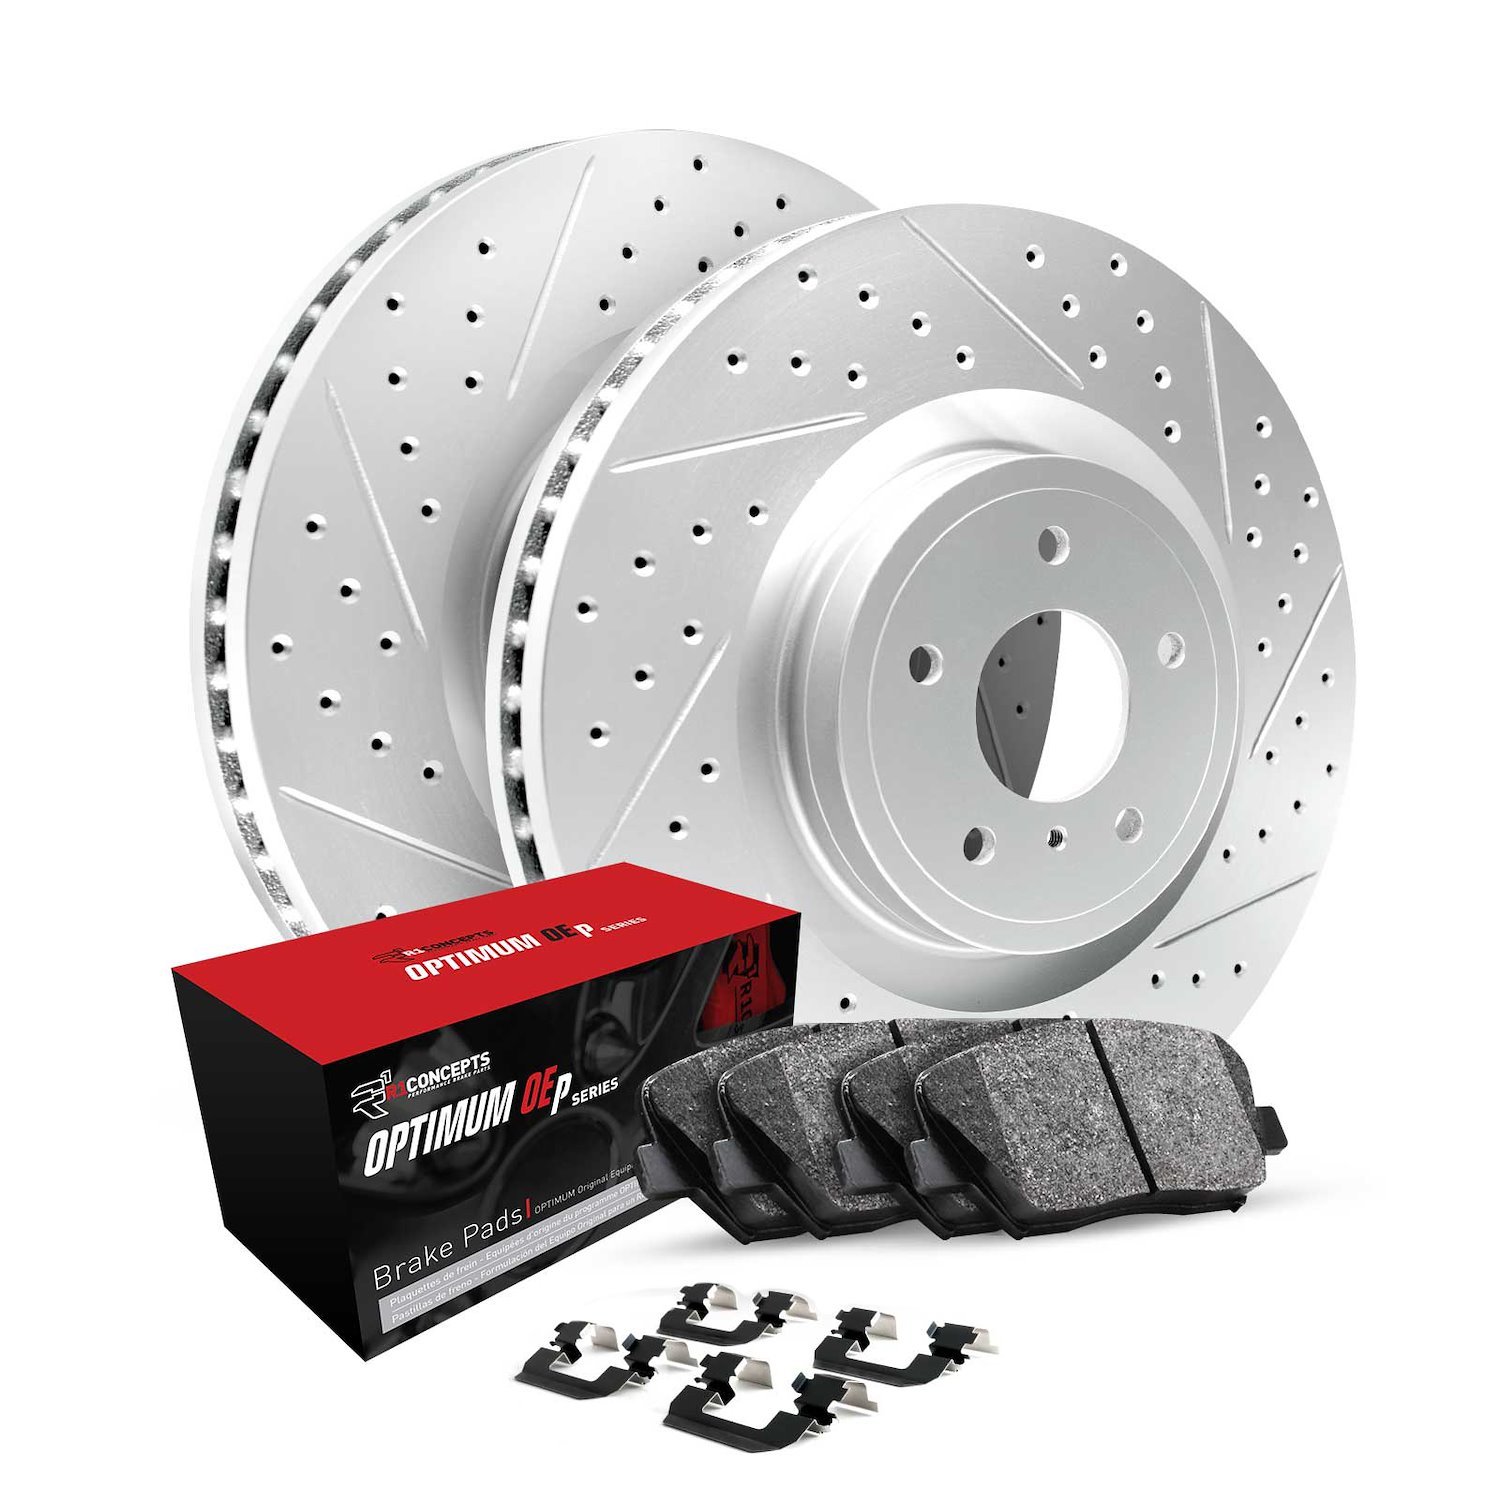 GEO-Carbon Drilled/Slotted Rotors w/Optimum OE Pads/Hardware, 1992-2000 Fits Multiple Makes/Models, Position: Front